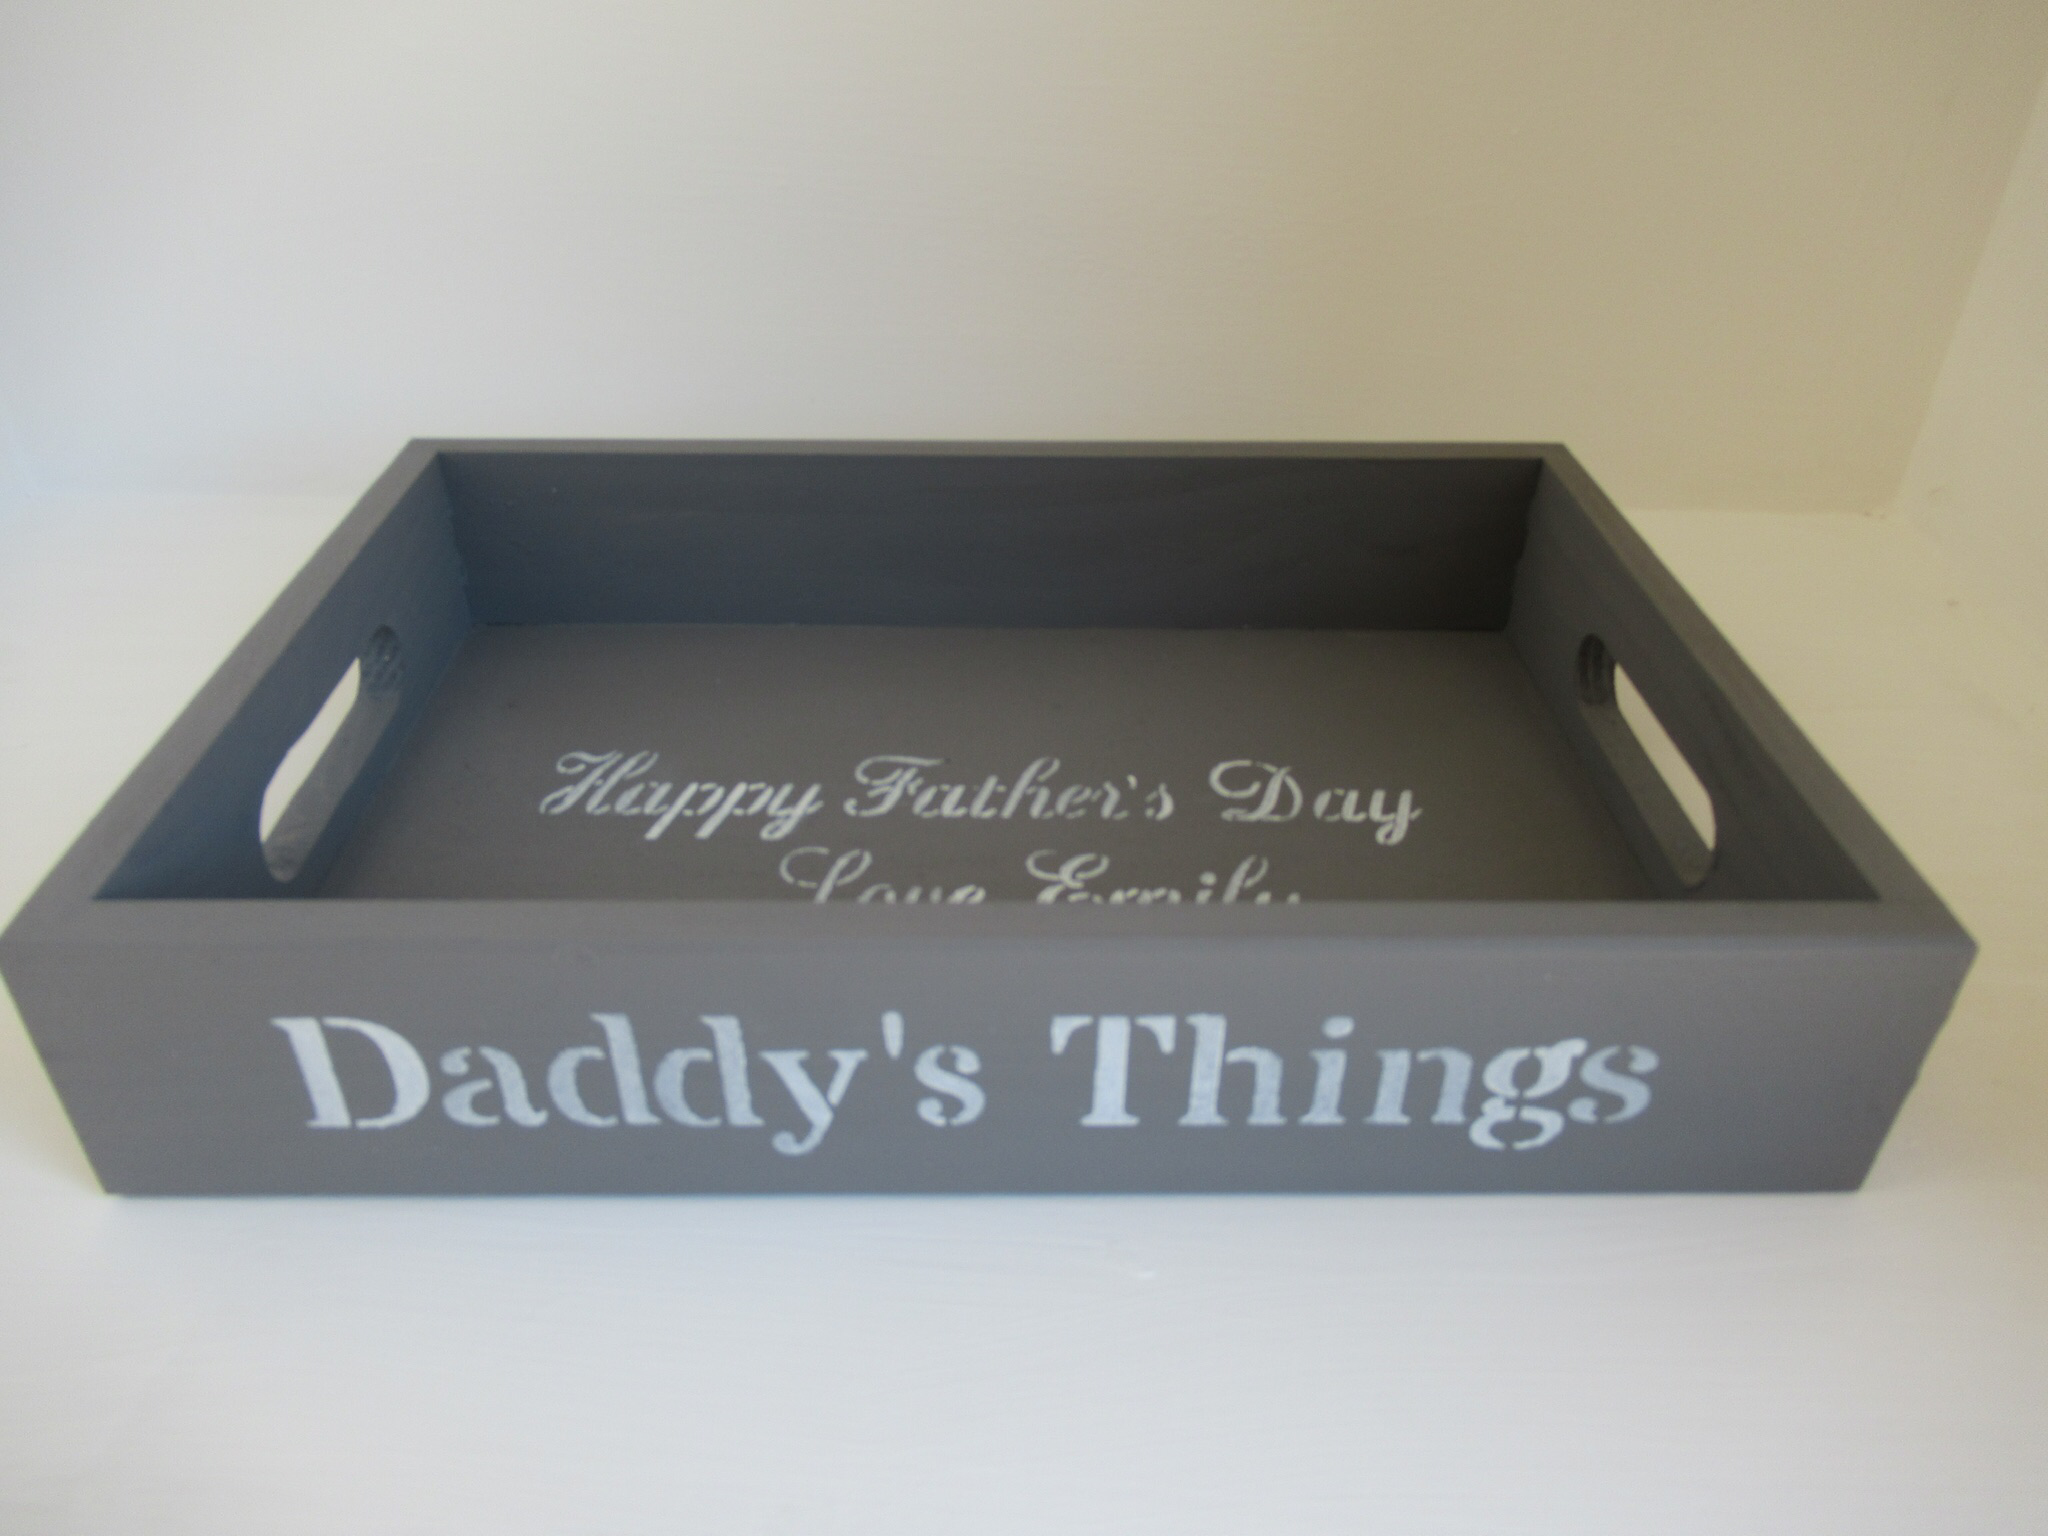 Grandad Grandpa Pops Gramps personalised tea tray BBQ tray drinks tray  Fathers Day gift decorative shabby chic wooden tray Free UK P&P